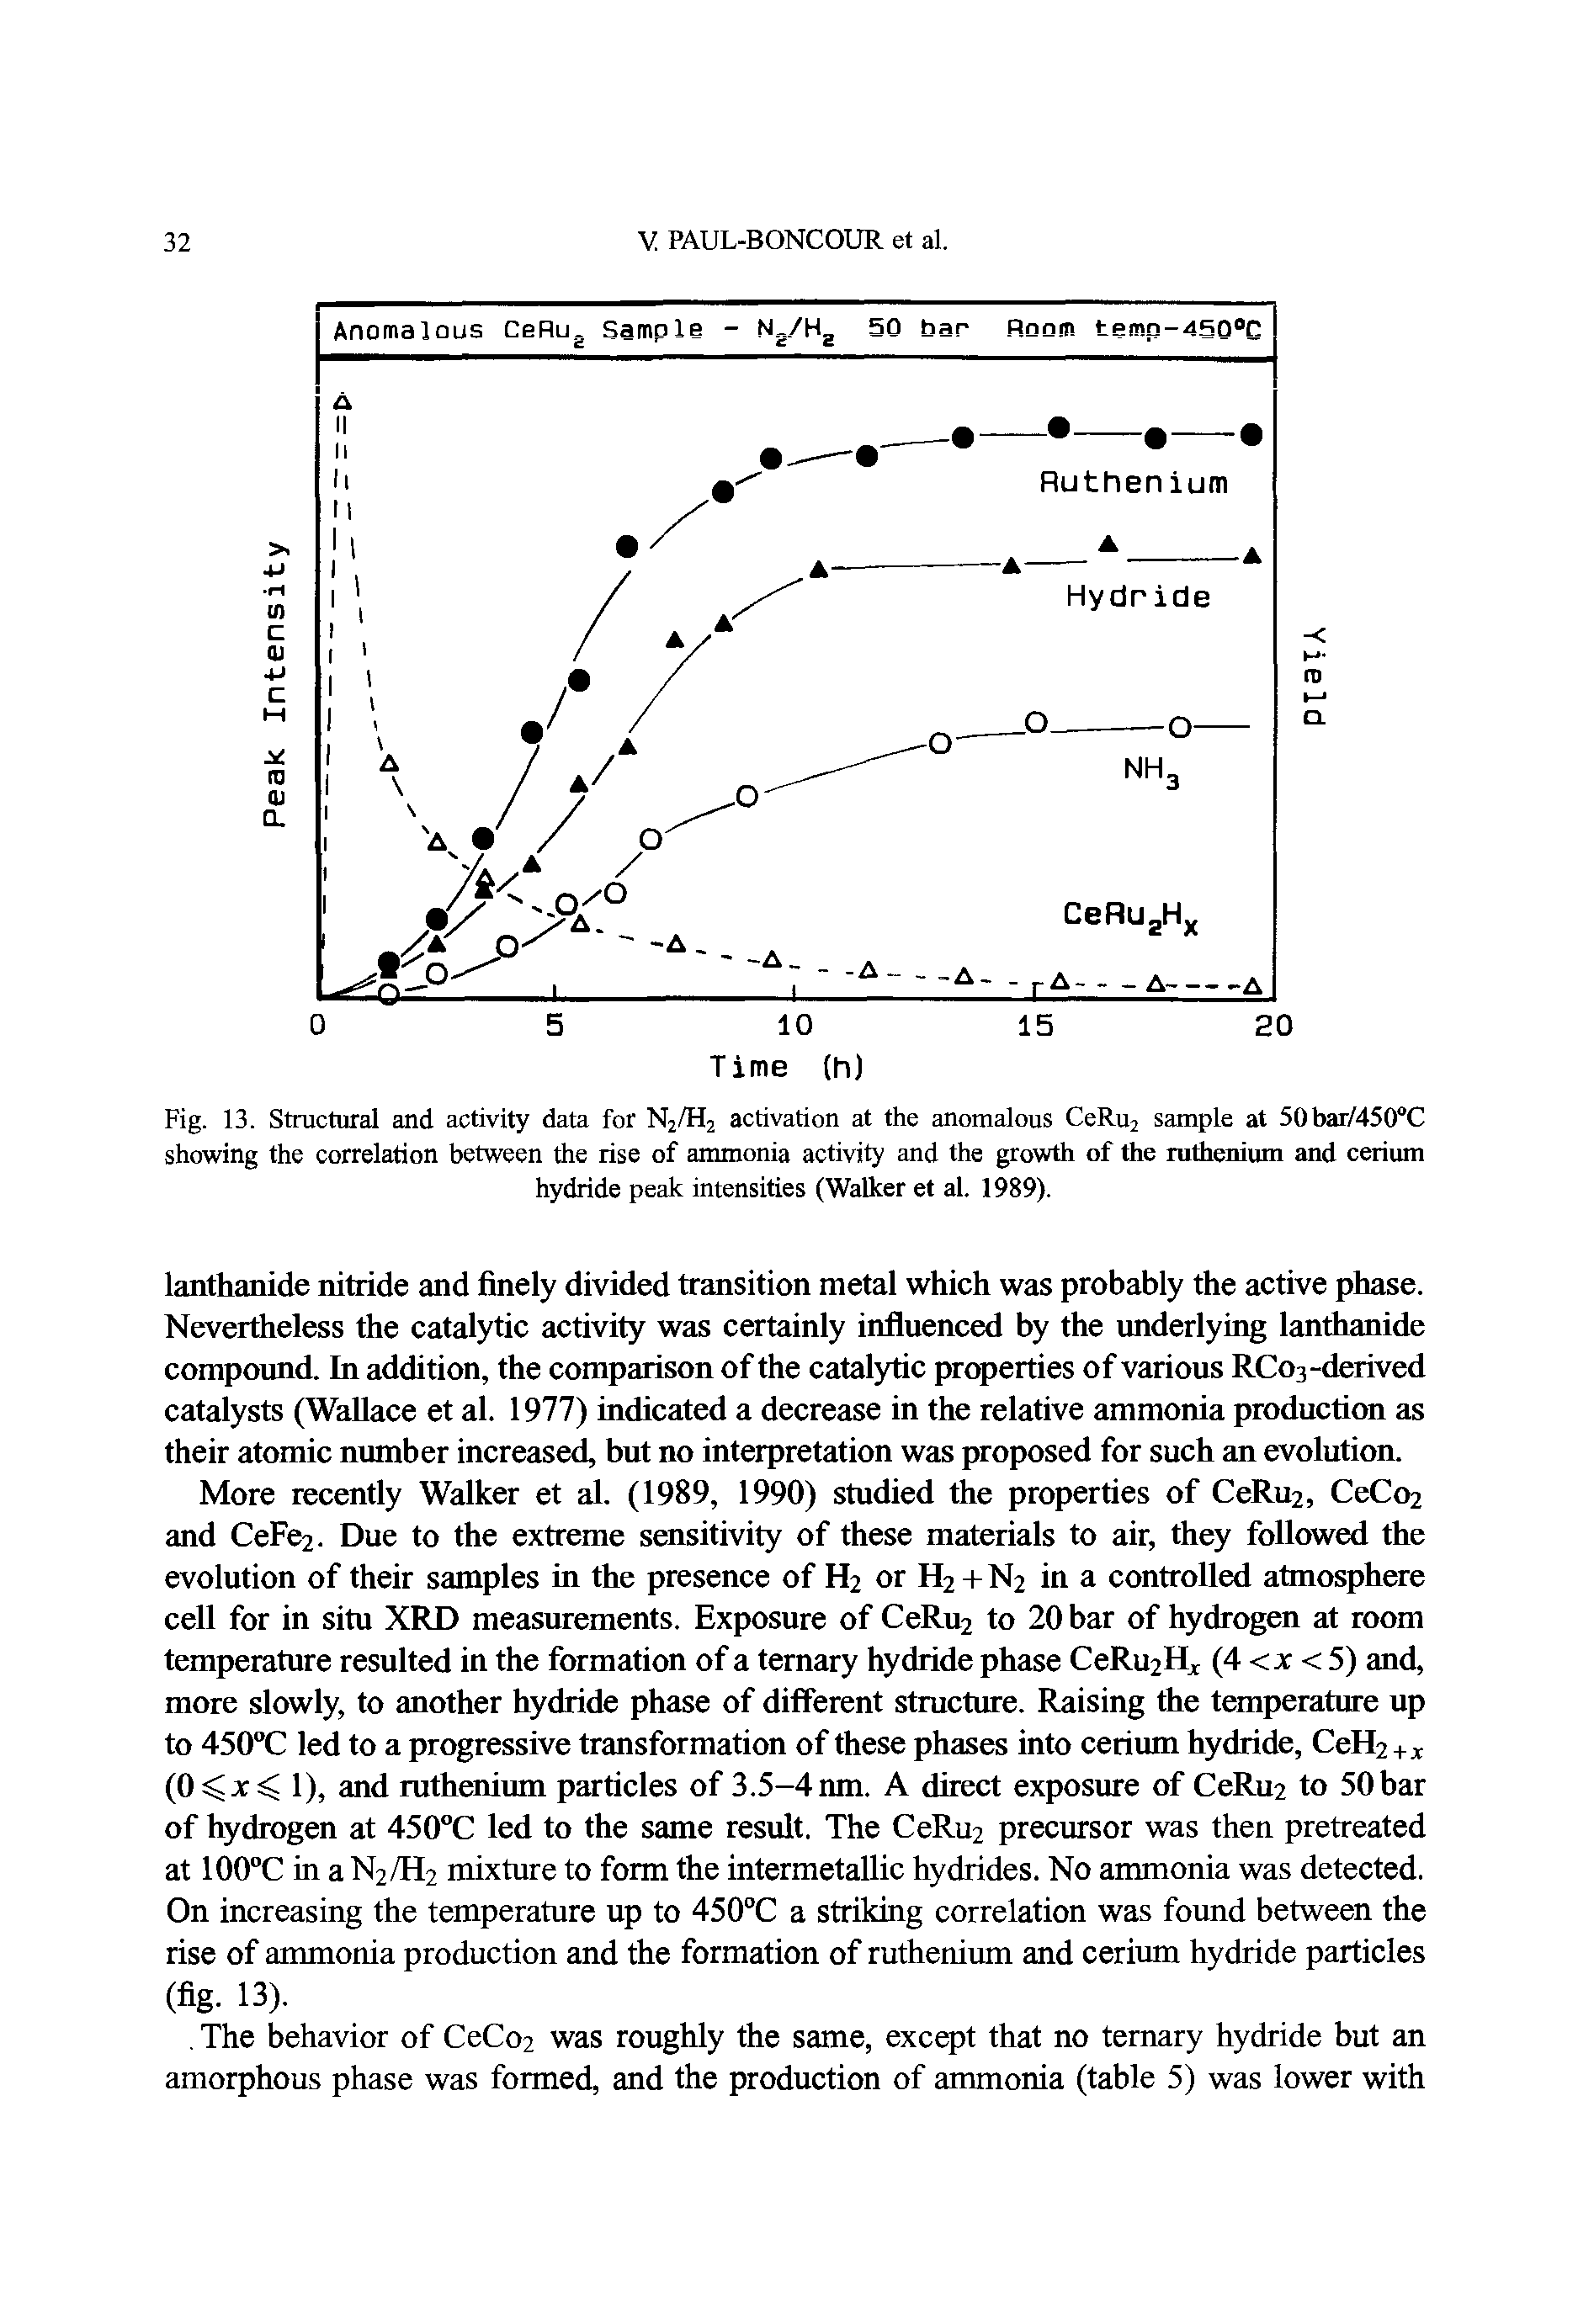 Fig. 13. Structural and activity data for N2/H2 activation at the anomalous CeRu2 sample at 50bar/450°C showing the correlation between the rise of ammonia activity and the growth of the ruthenium and cerium hydride peak intensities (Walker et al. 1989).